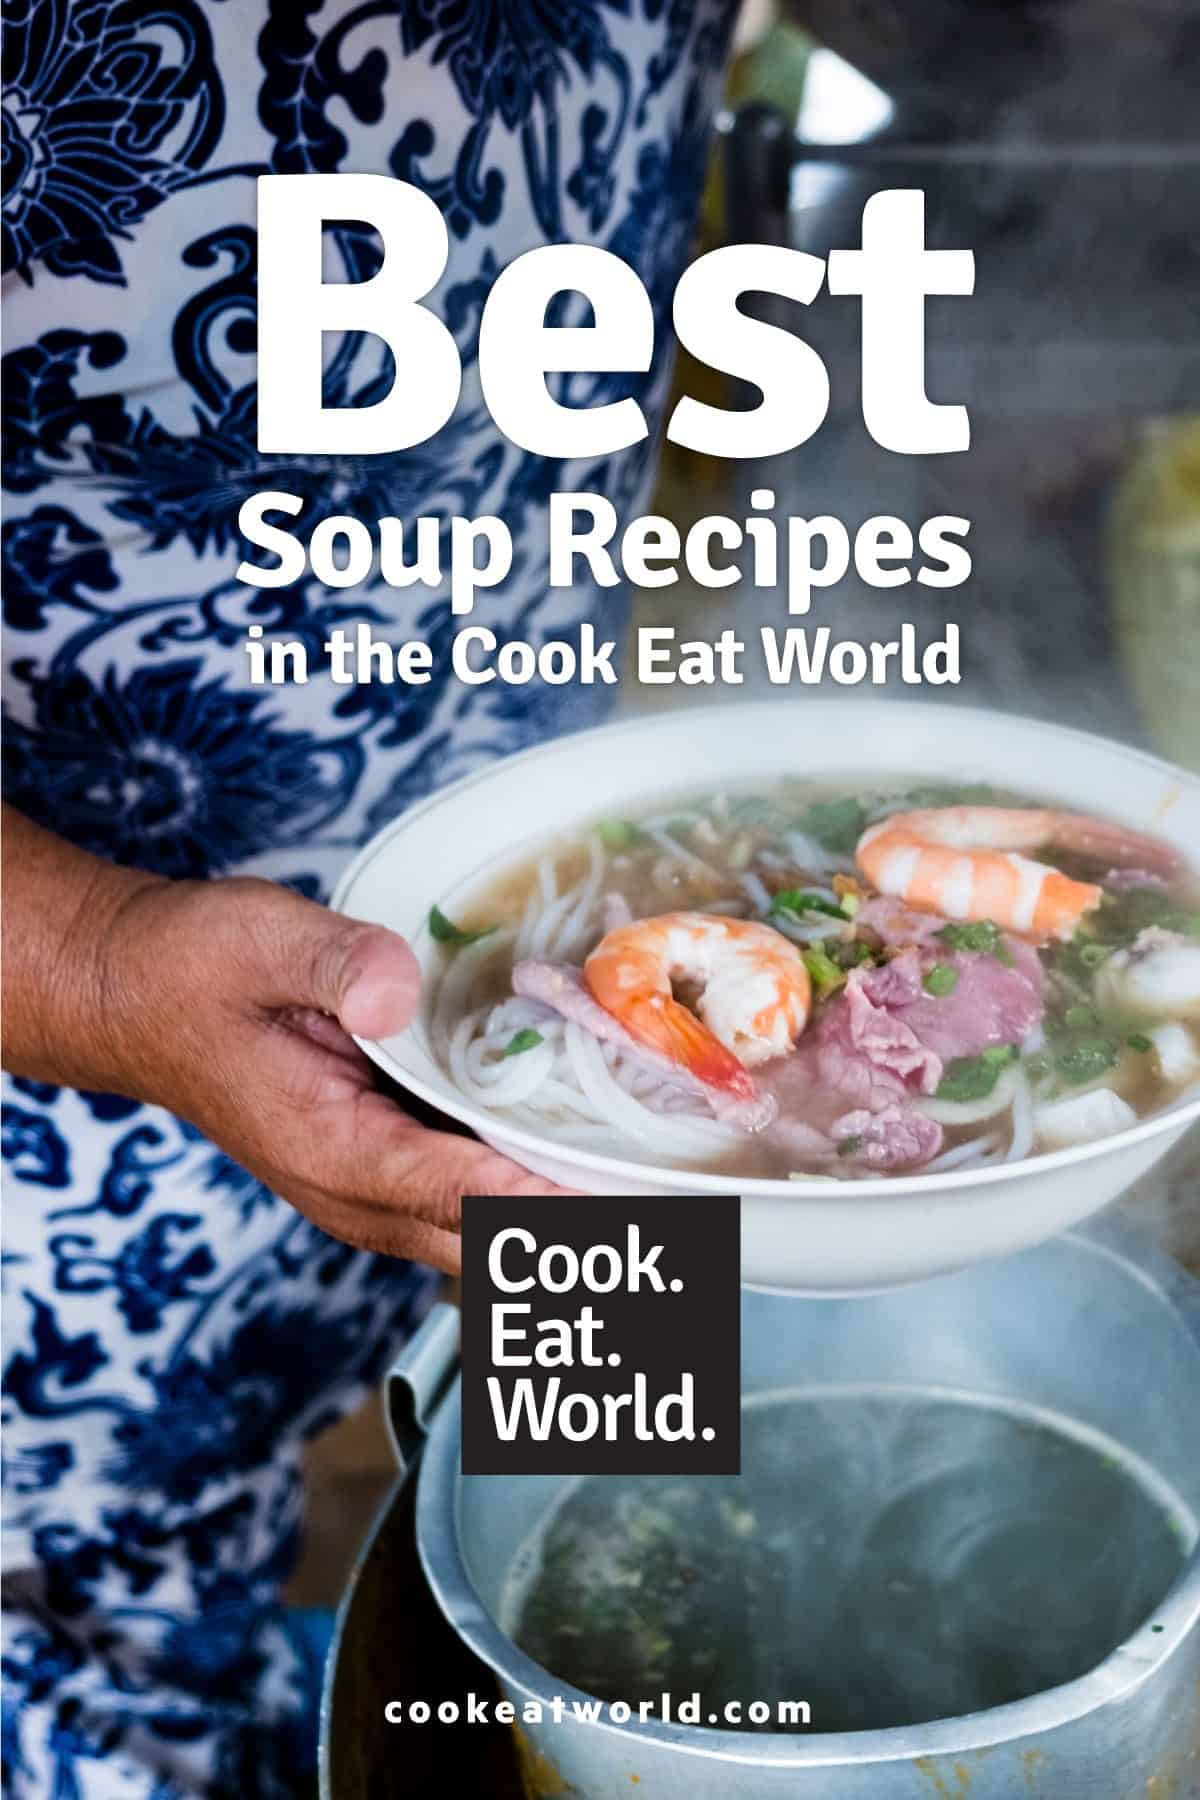 A close up photograph of a Vietnamese woman holding a bowl of Pho Soup with shrimp, beef and noodles - leading to a post about the best soup recipes from cookeatworld.com